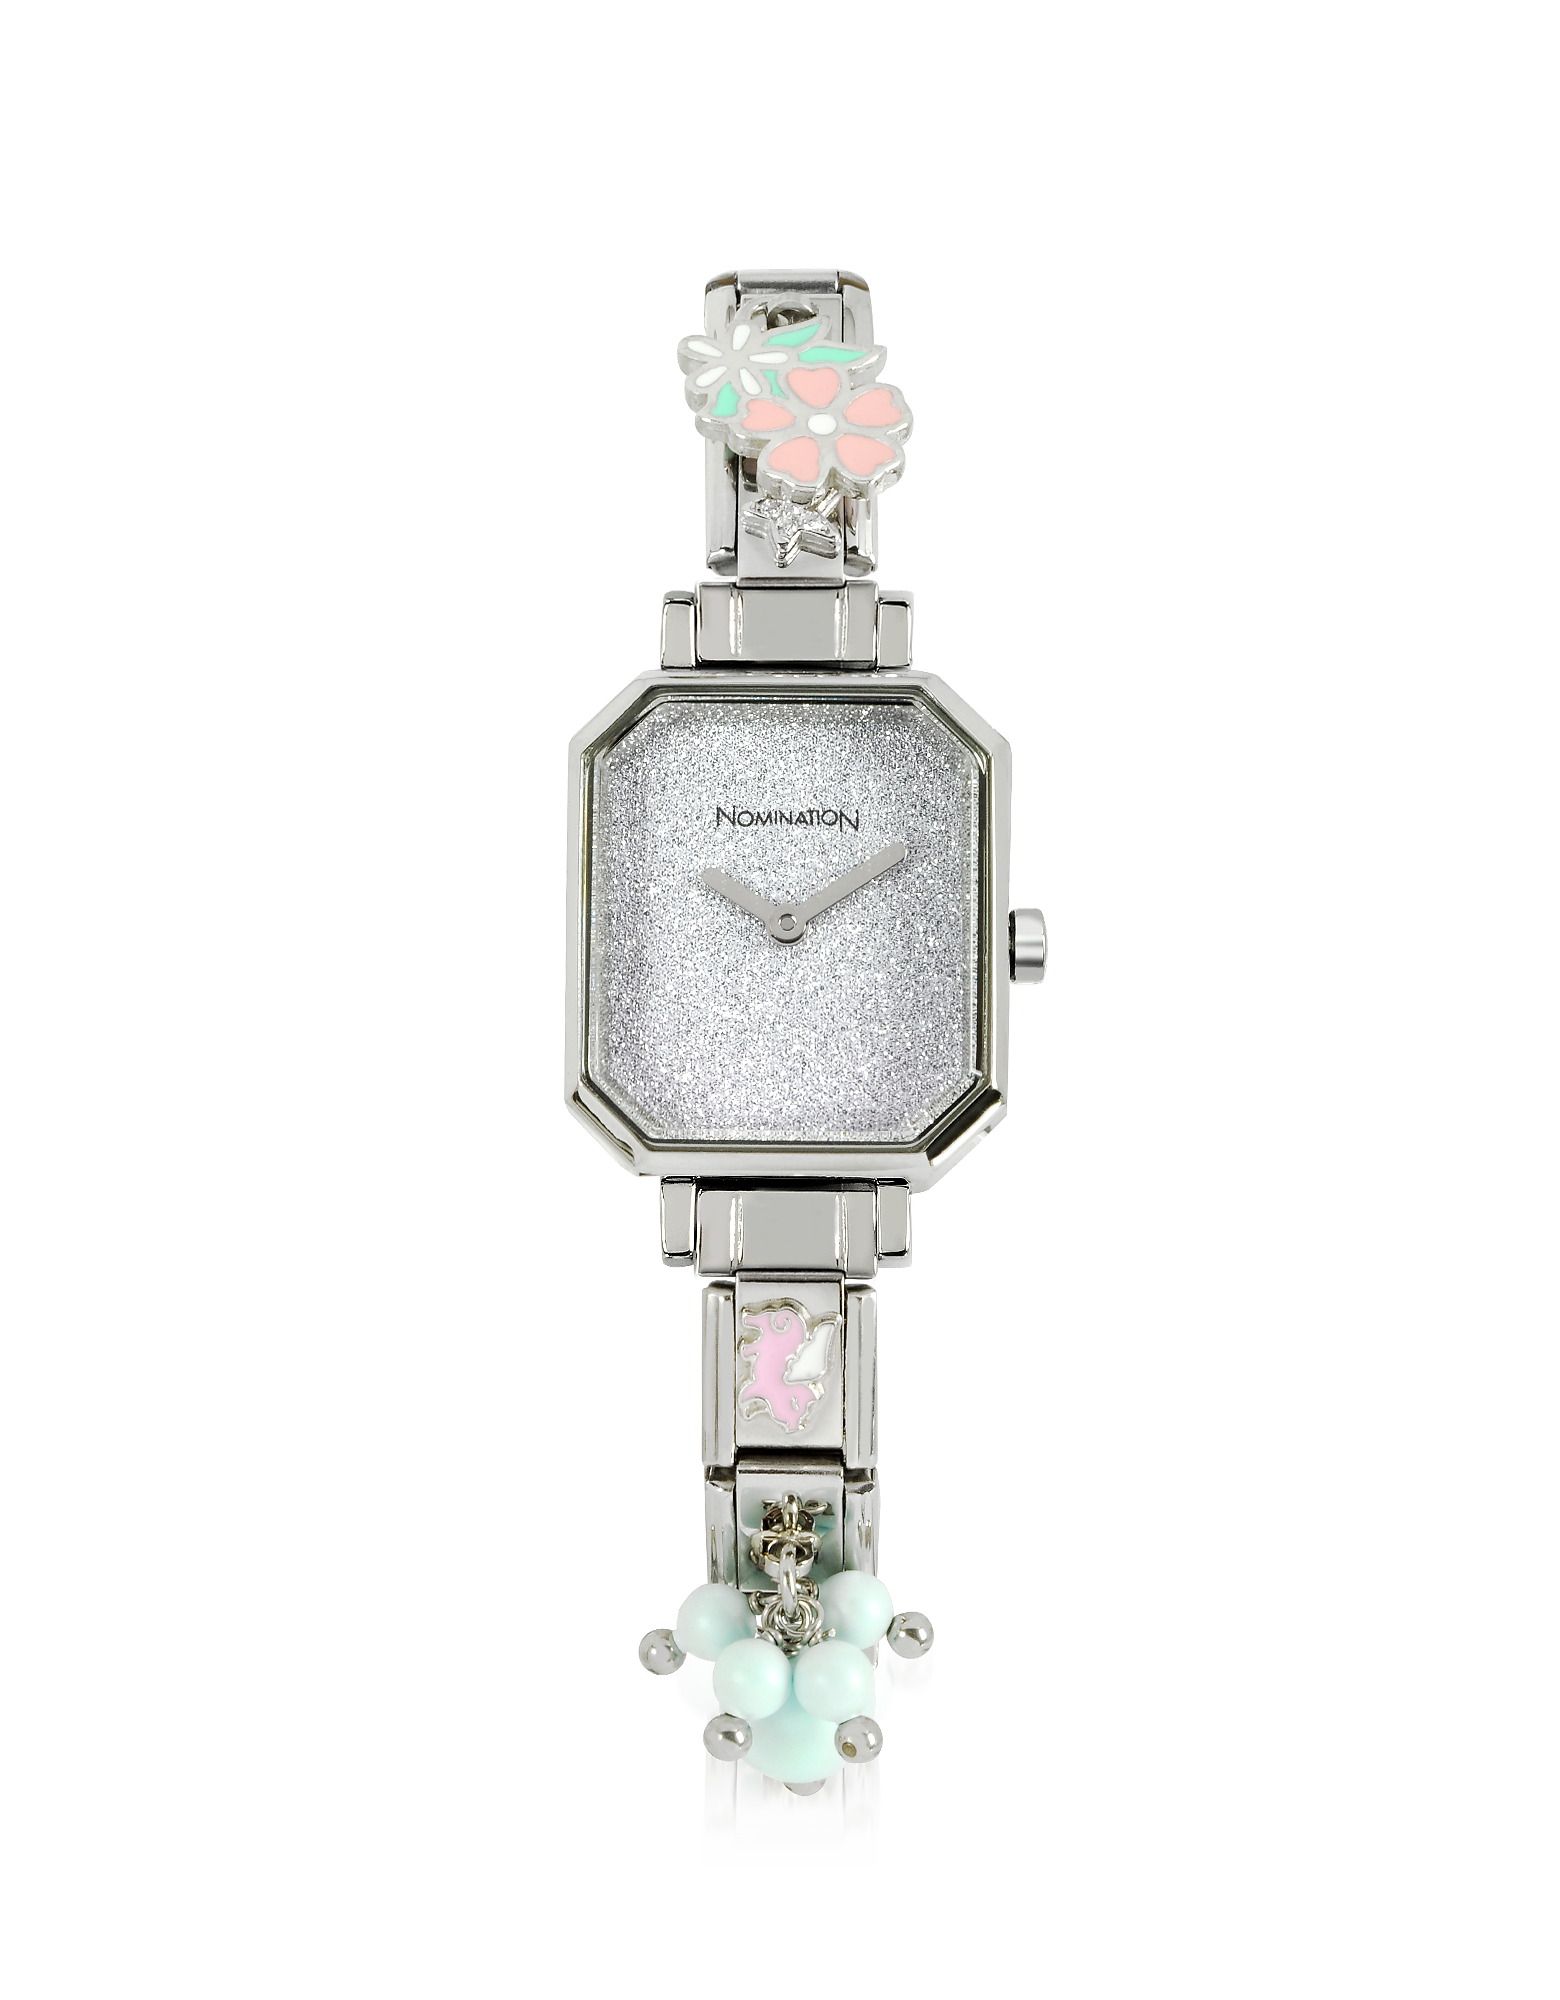 

Silver Plated Stainless Steel Composable Women's Watch w/Crystals